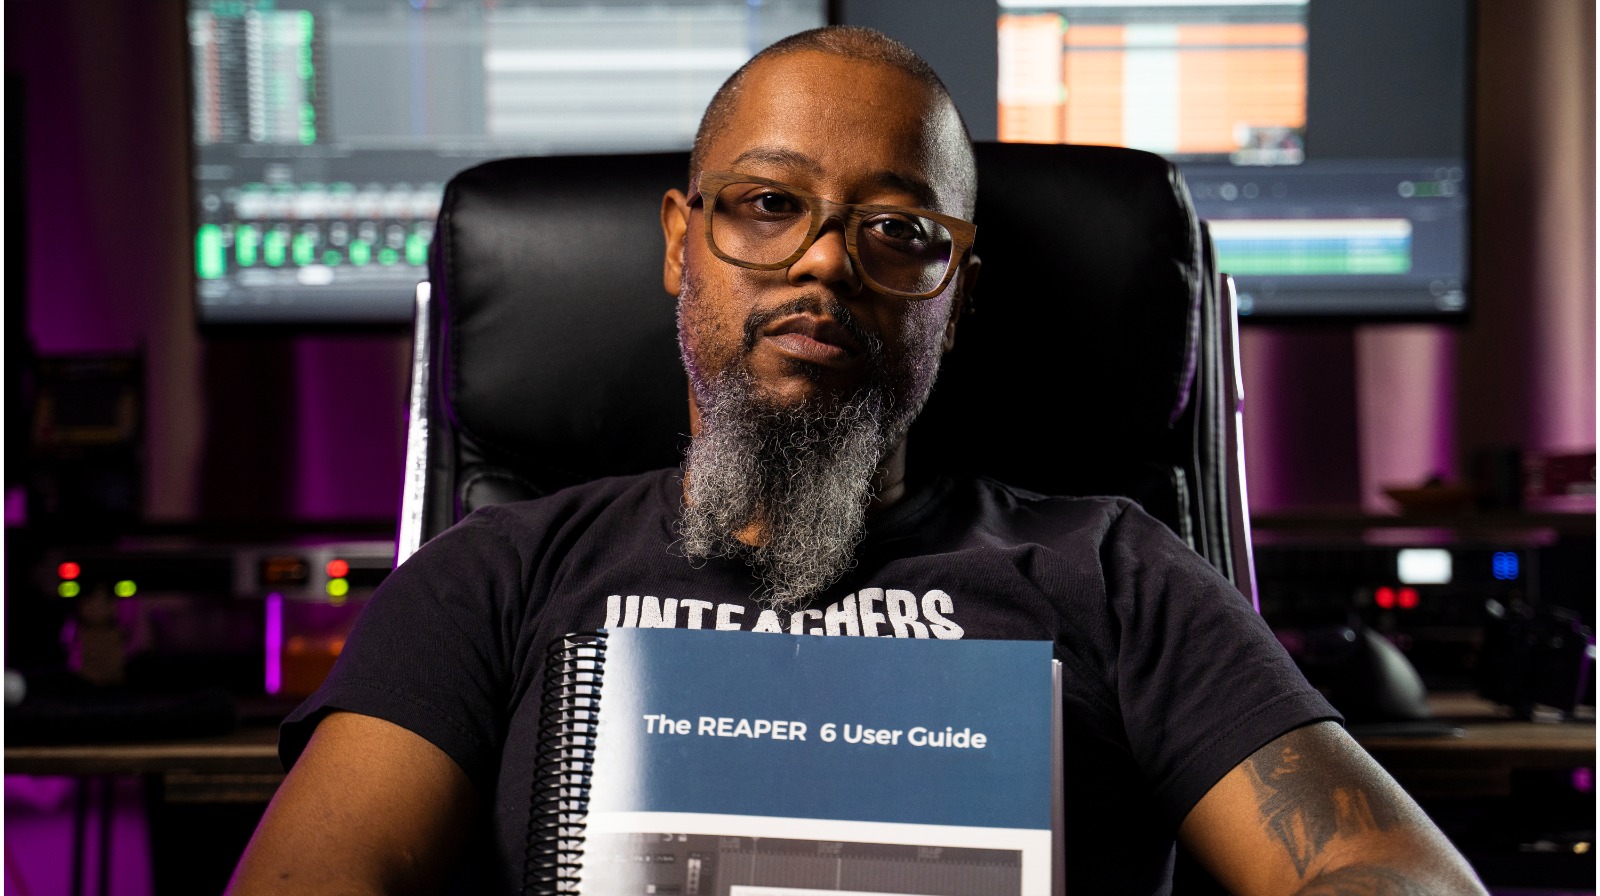 myk robinson sitting in a chair holding a reaper user guide book